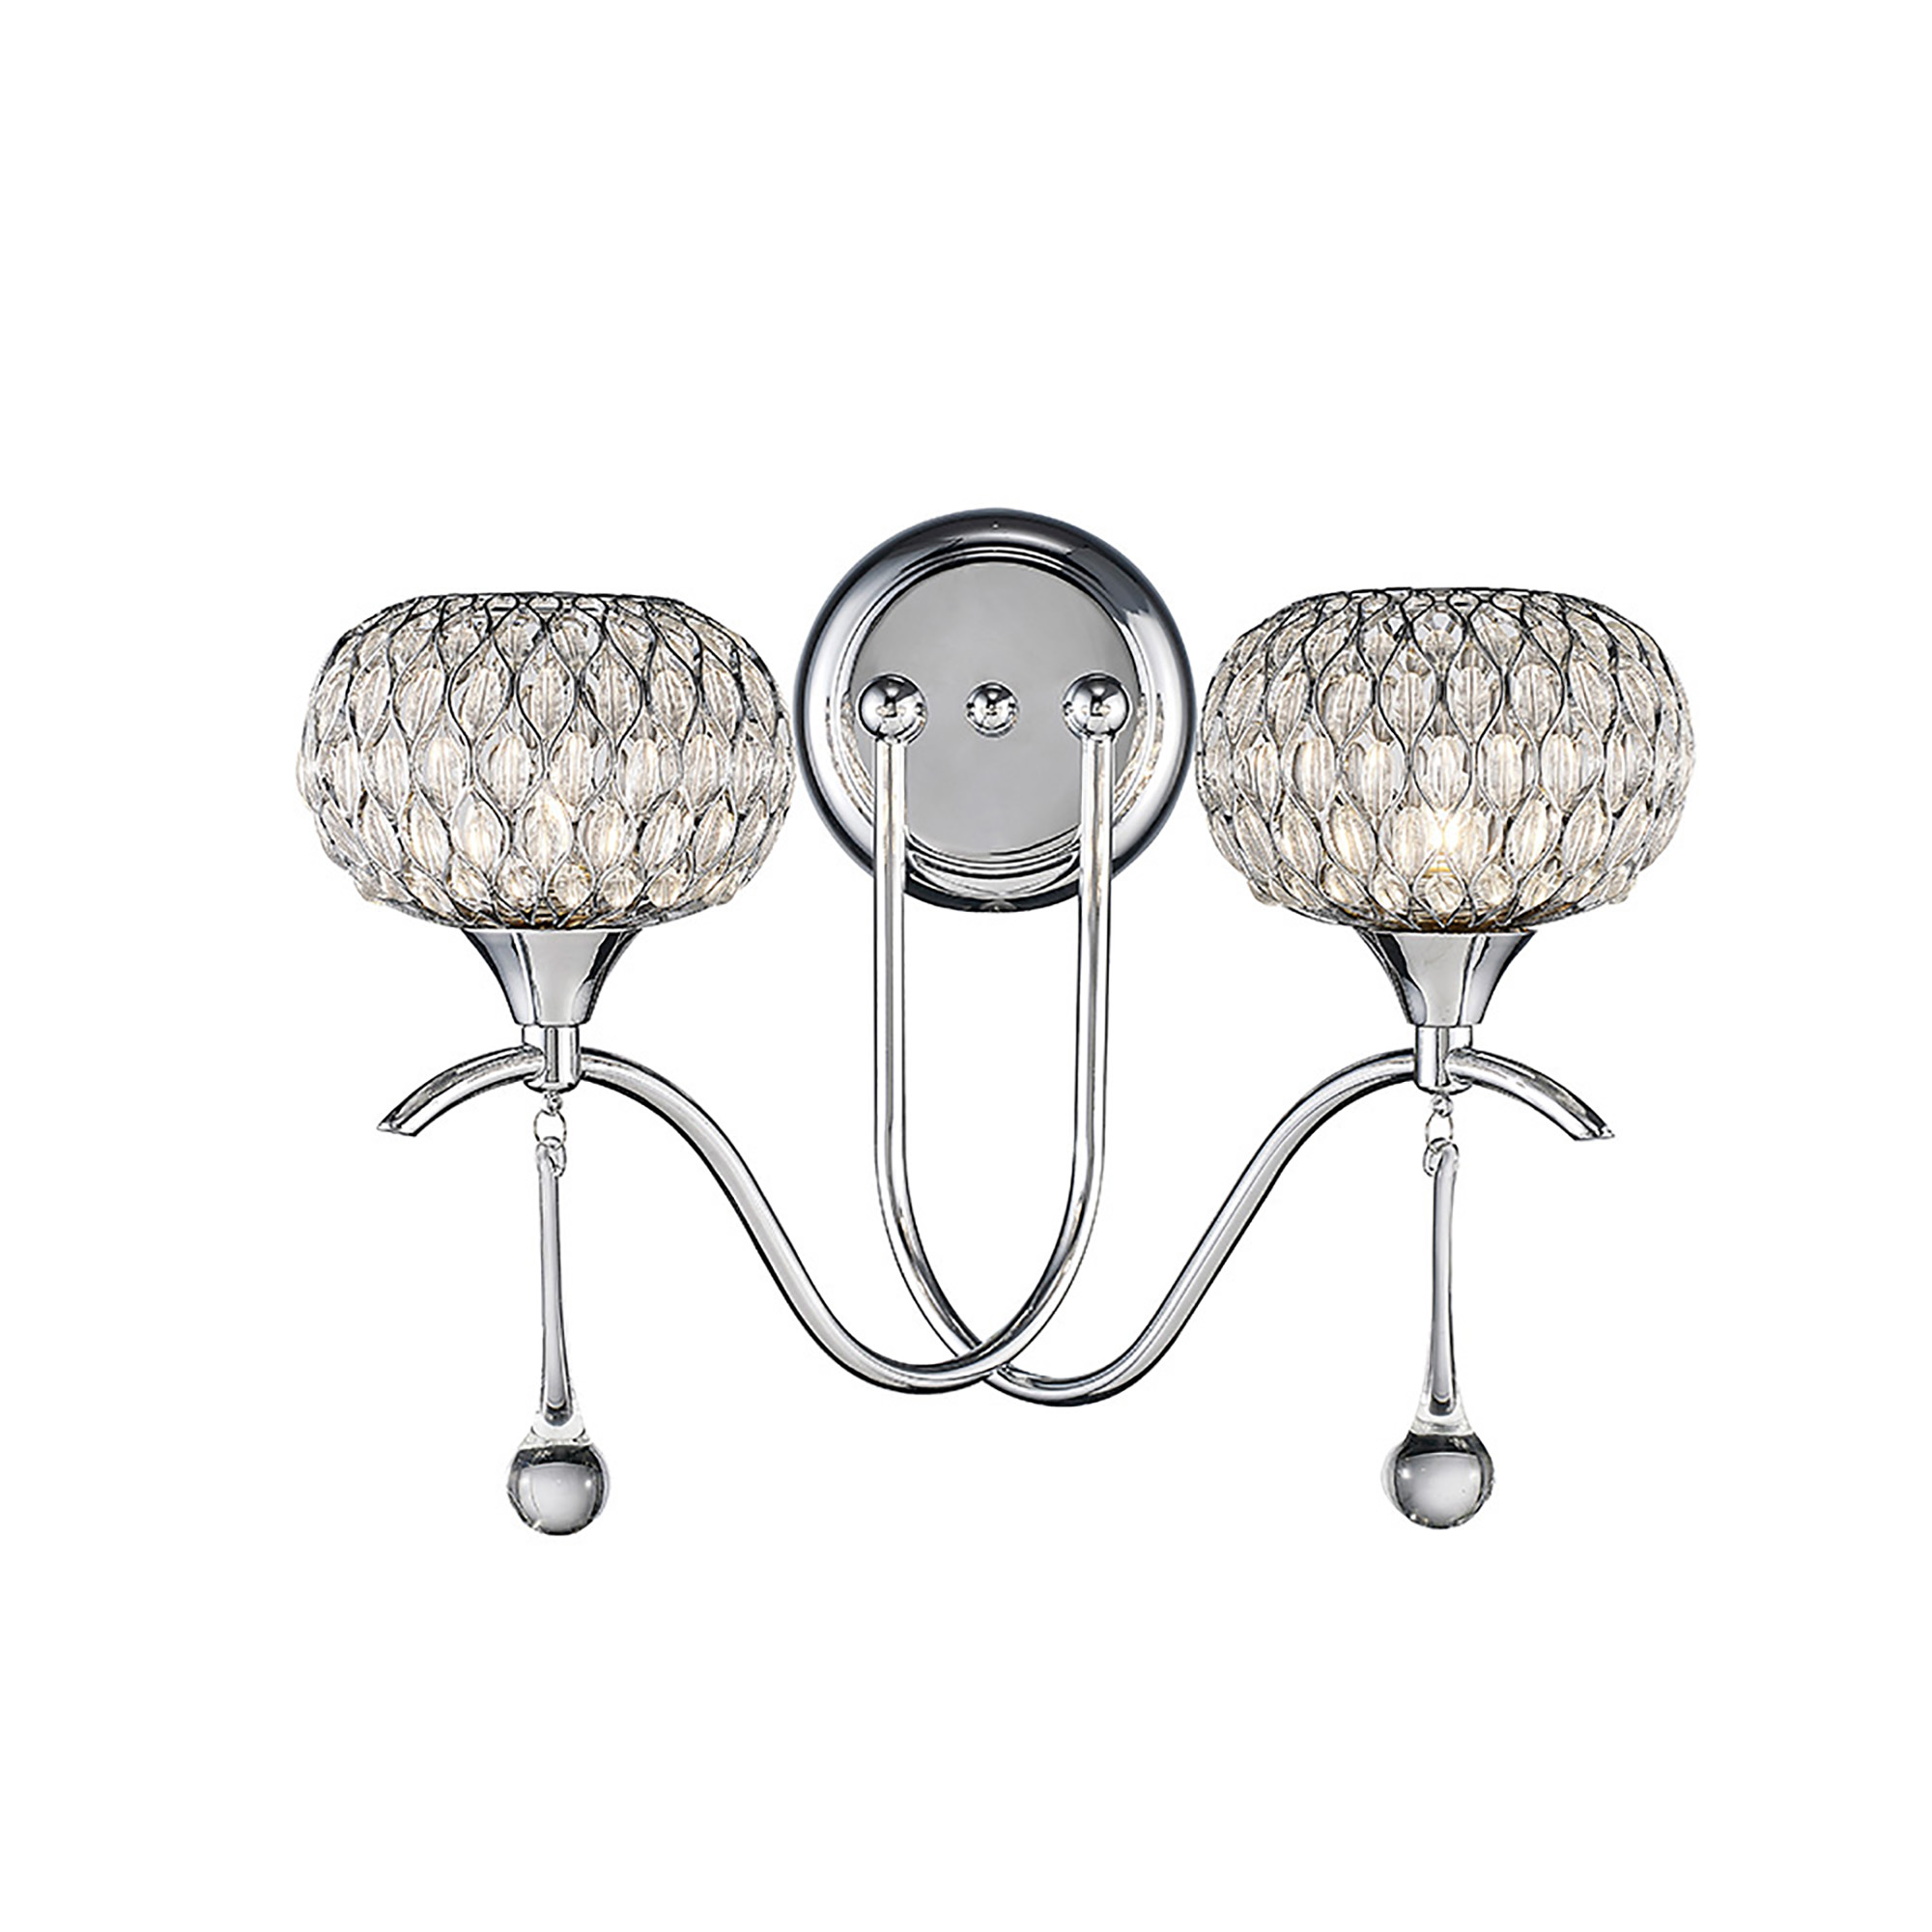 IL31501  Chelsie Wall Lamp 2 Light Polished Chrome